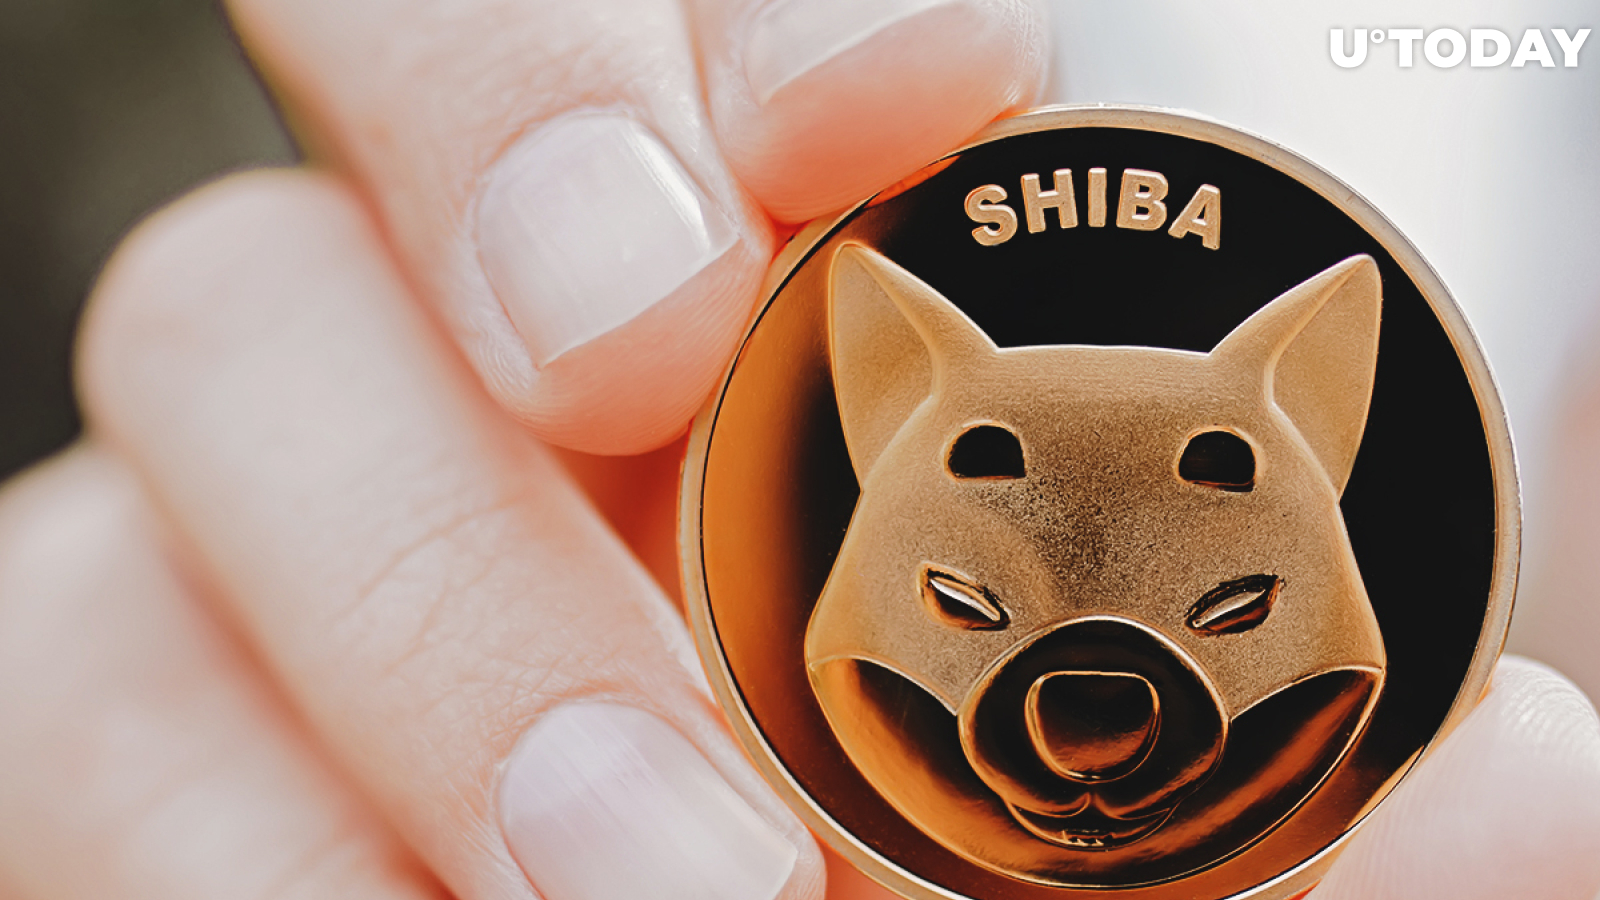 SHIB Is Hitting Crypto Market with Disruptive 370% Rise, Bloomberg Reports